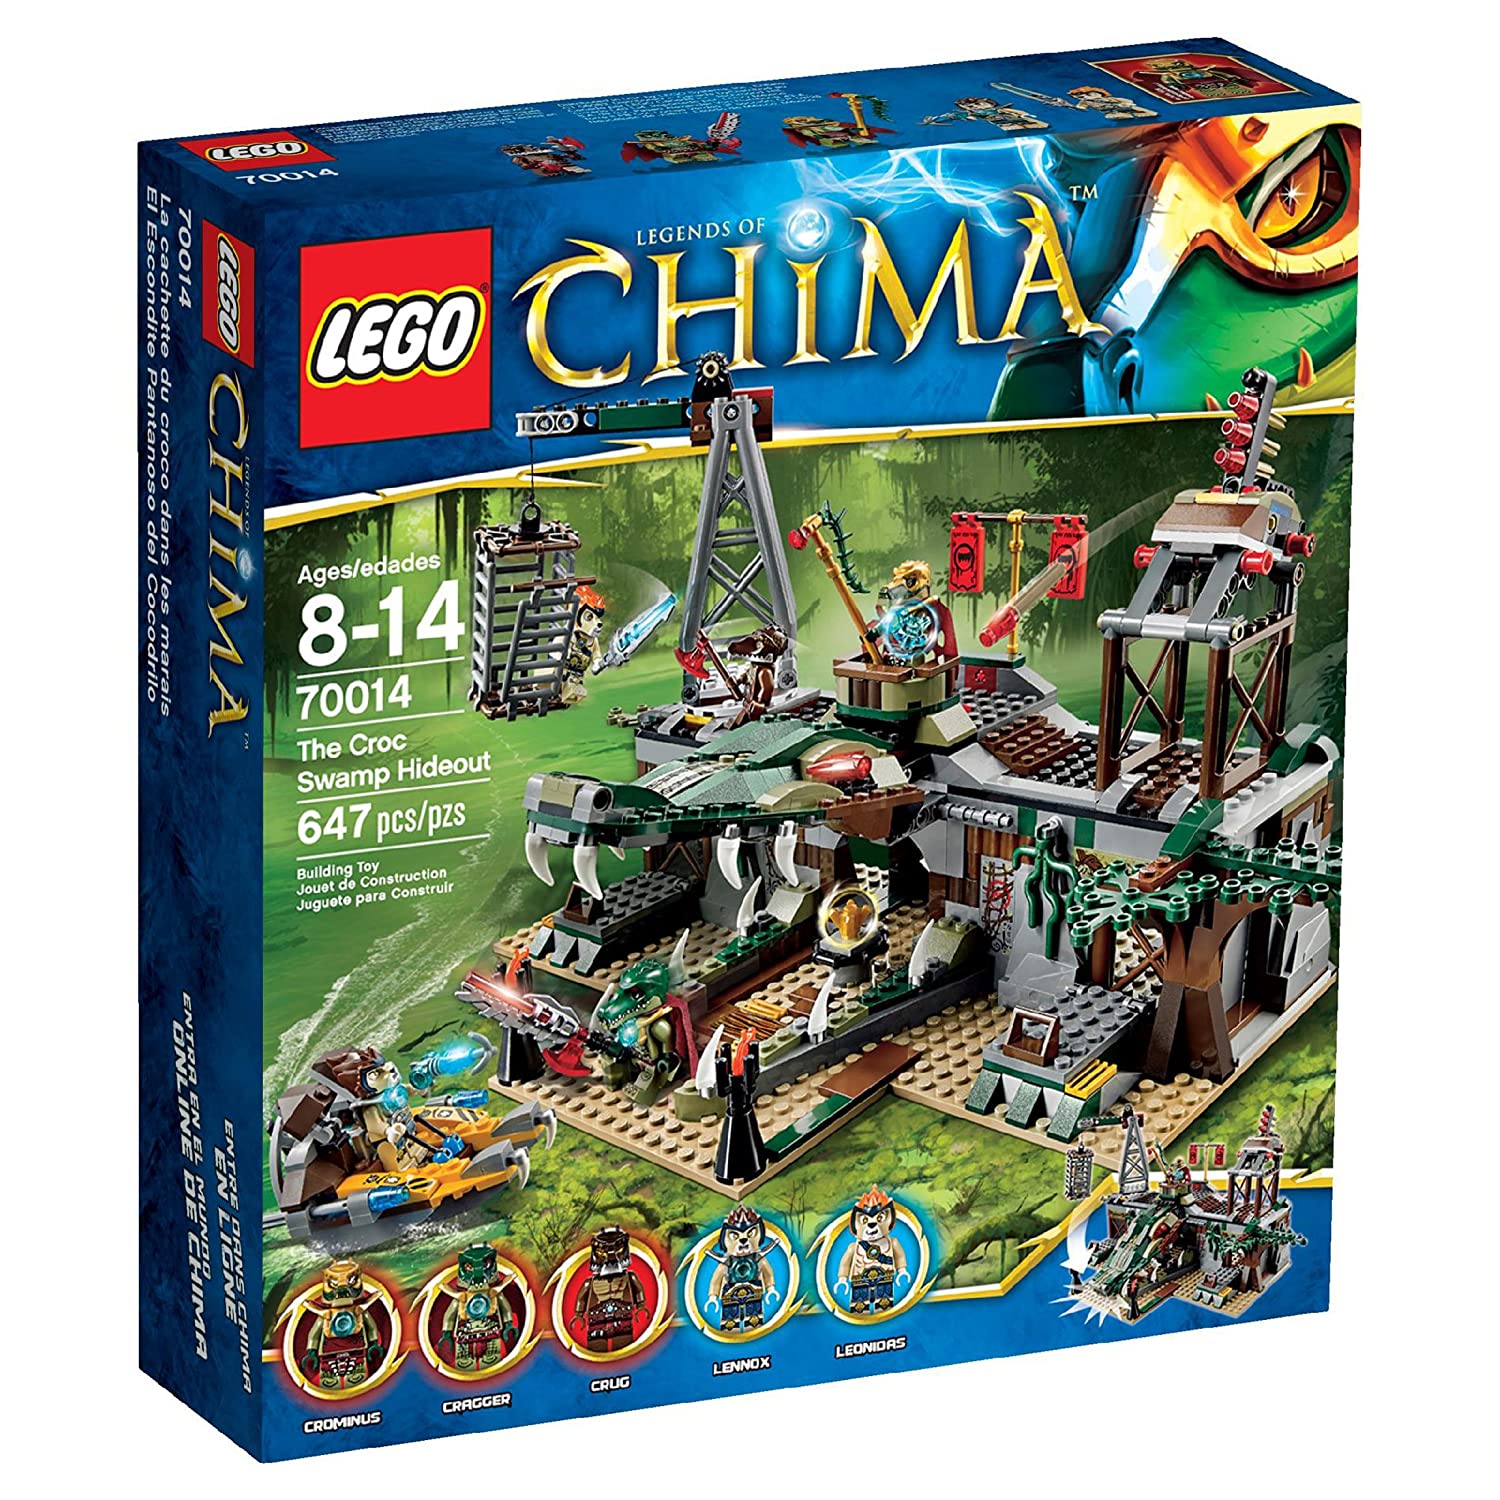 9 Best LEGO Chima Sets 2022 - Buying Guide & Reviews 1